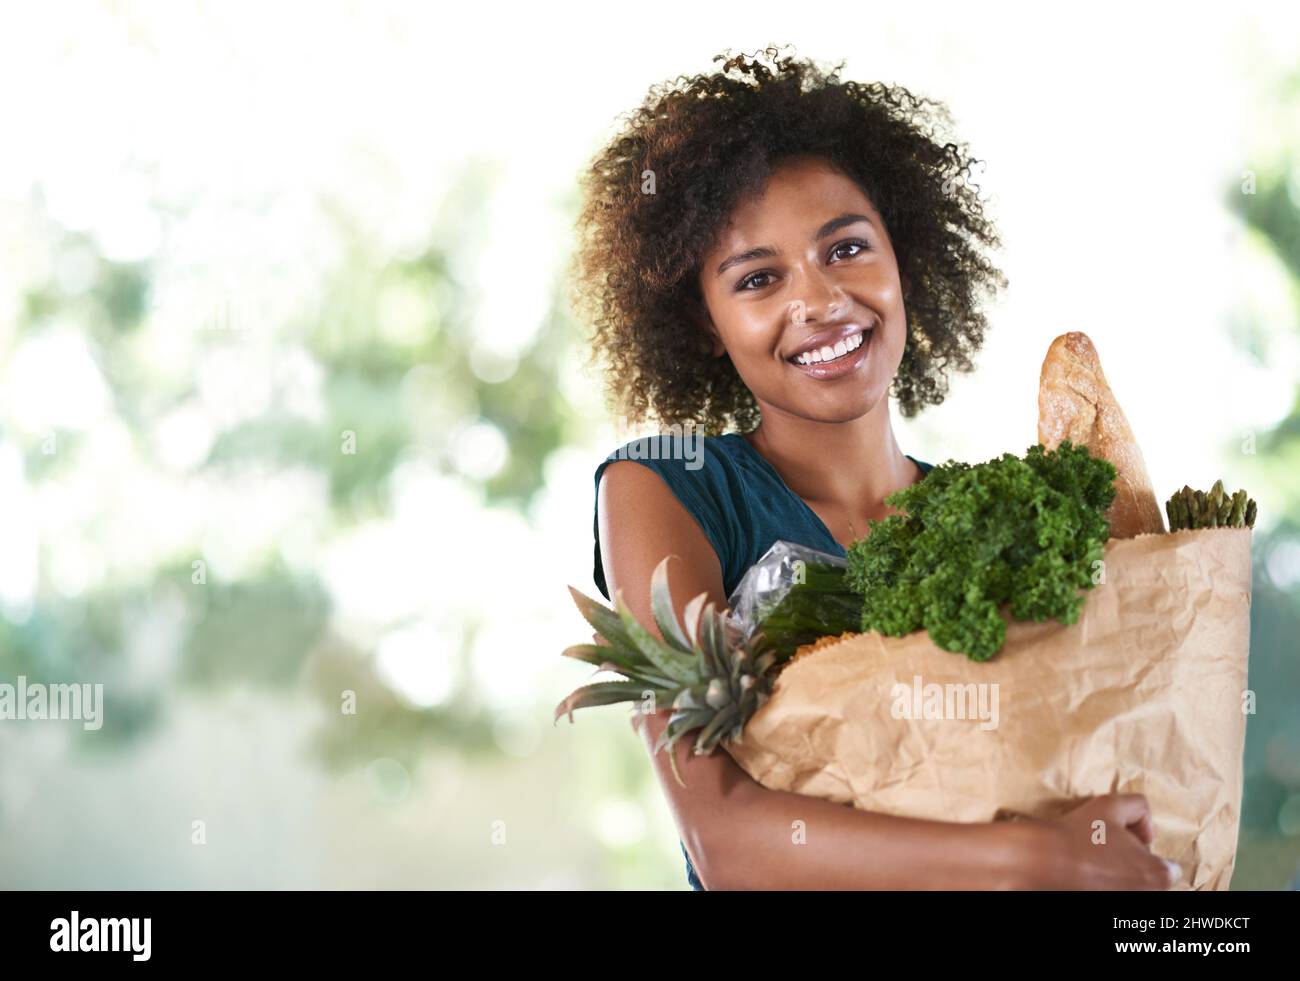 Bag of health. Young girl smiling while holding her groceries - isolated. Stock Photo